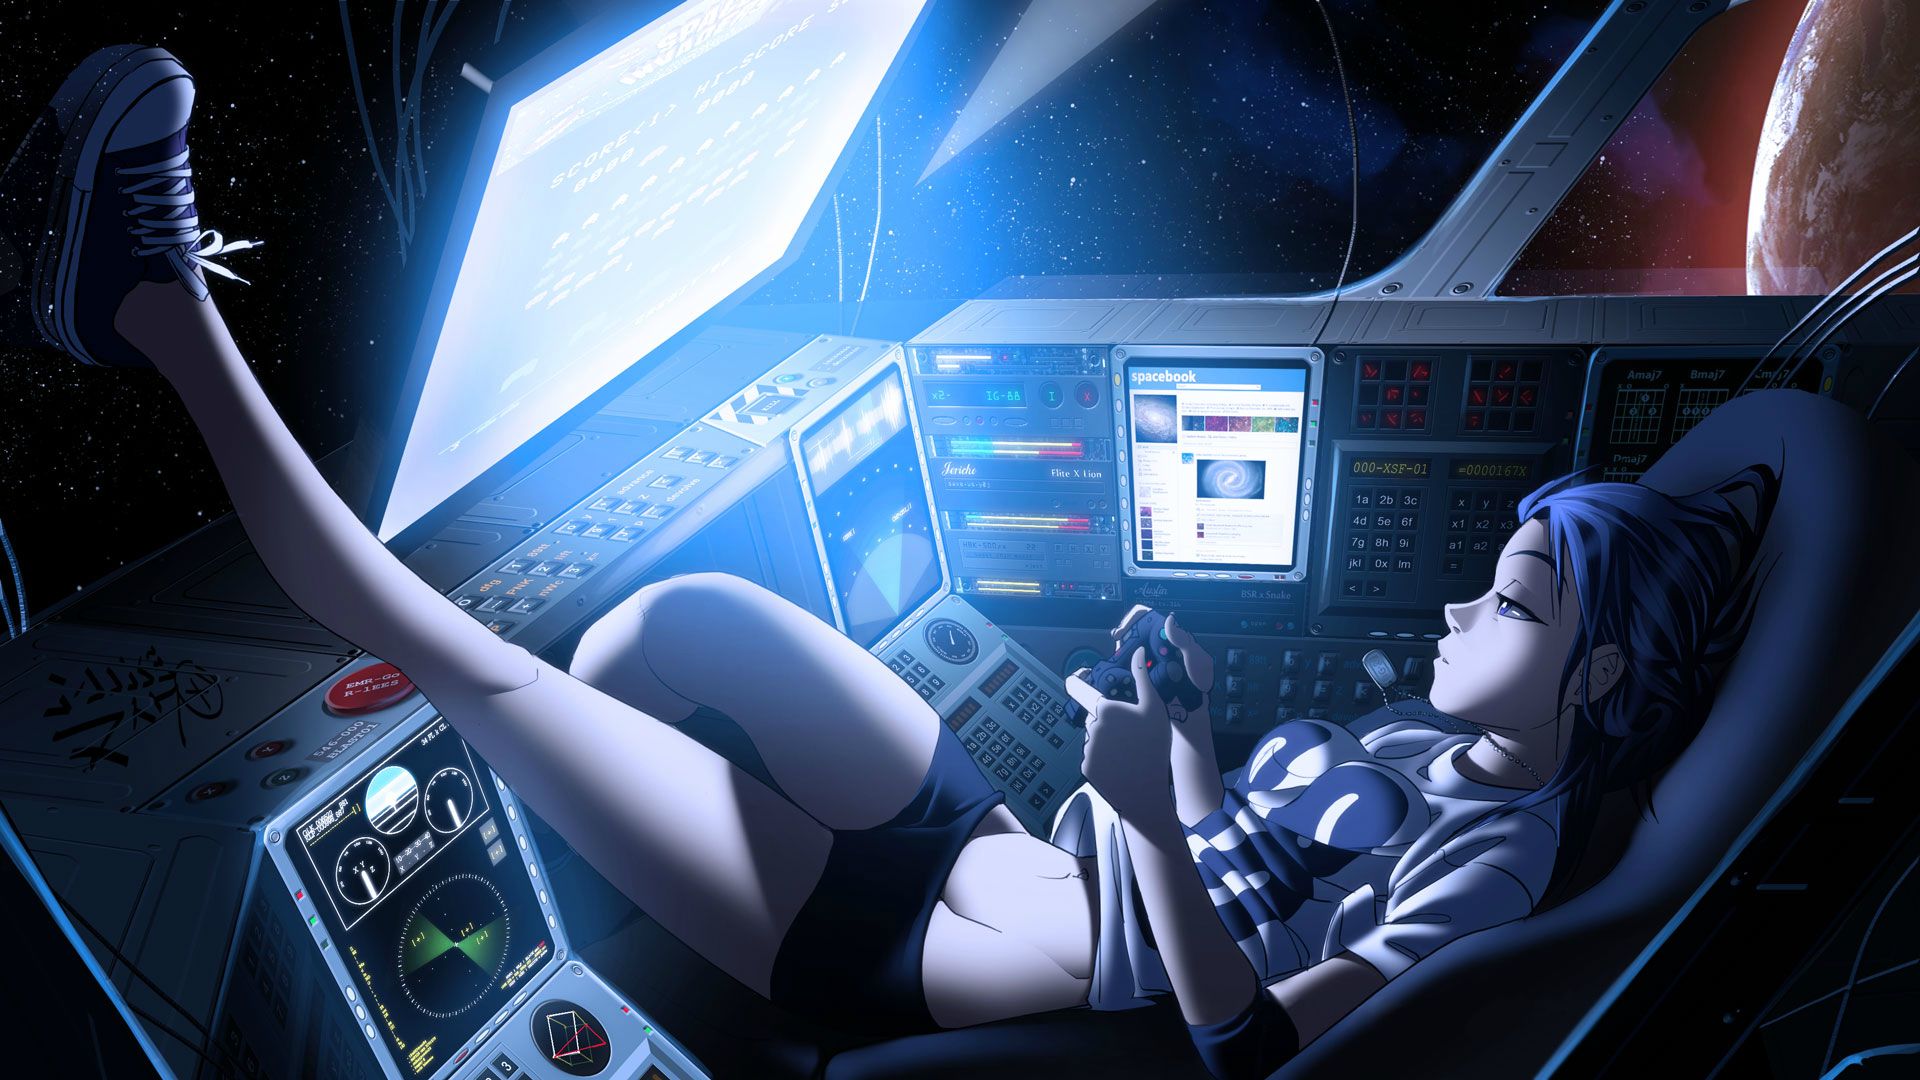 Anime 1920x1080 artwork anime digital art anime girls video games drawing futuristic space space station vashperado PlayStation 3 Space Invaders spaceship zero gravity belly cockpit controllers star trails gamer science fiction cyan science fiction women legs Converse